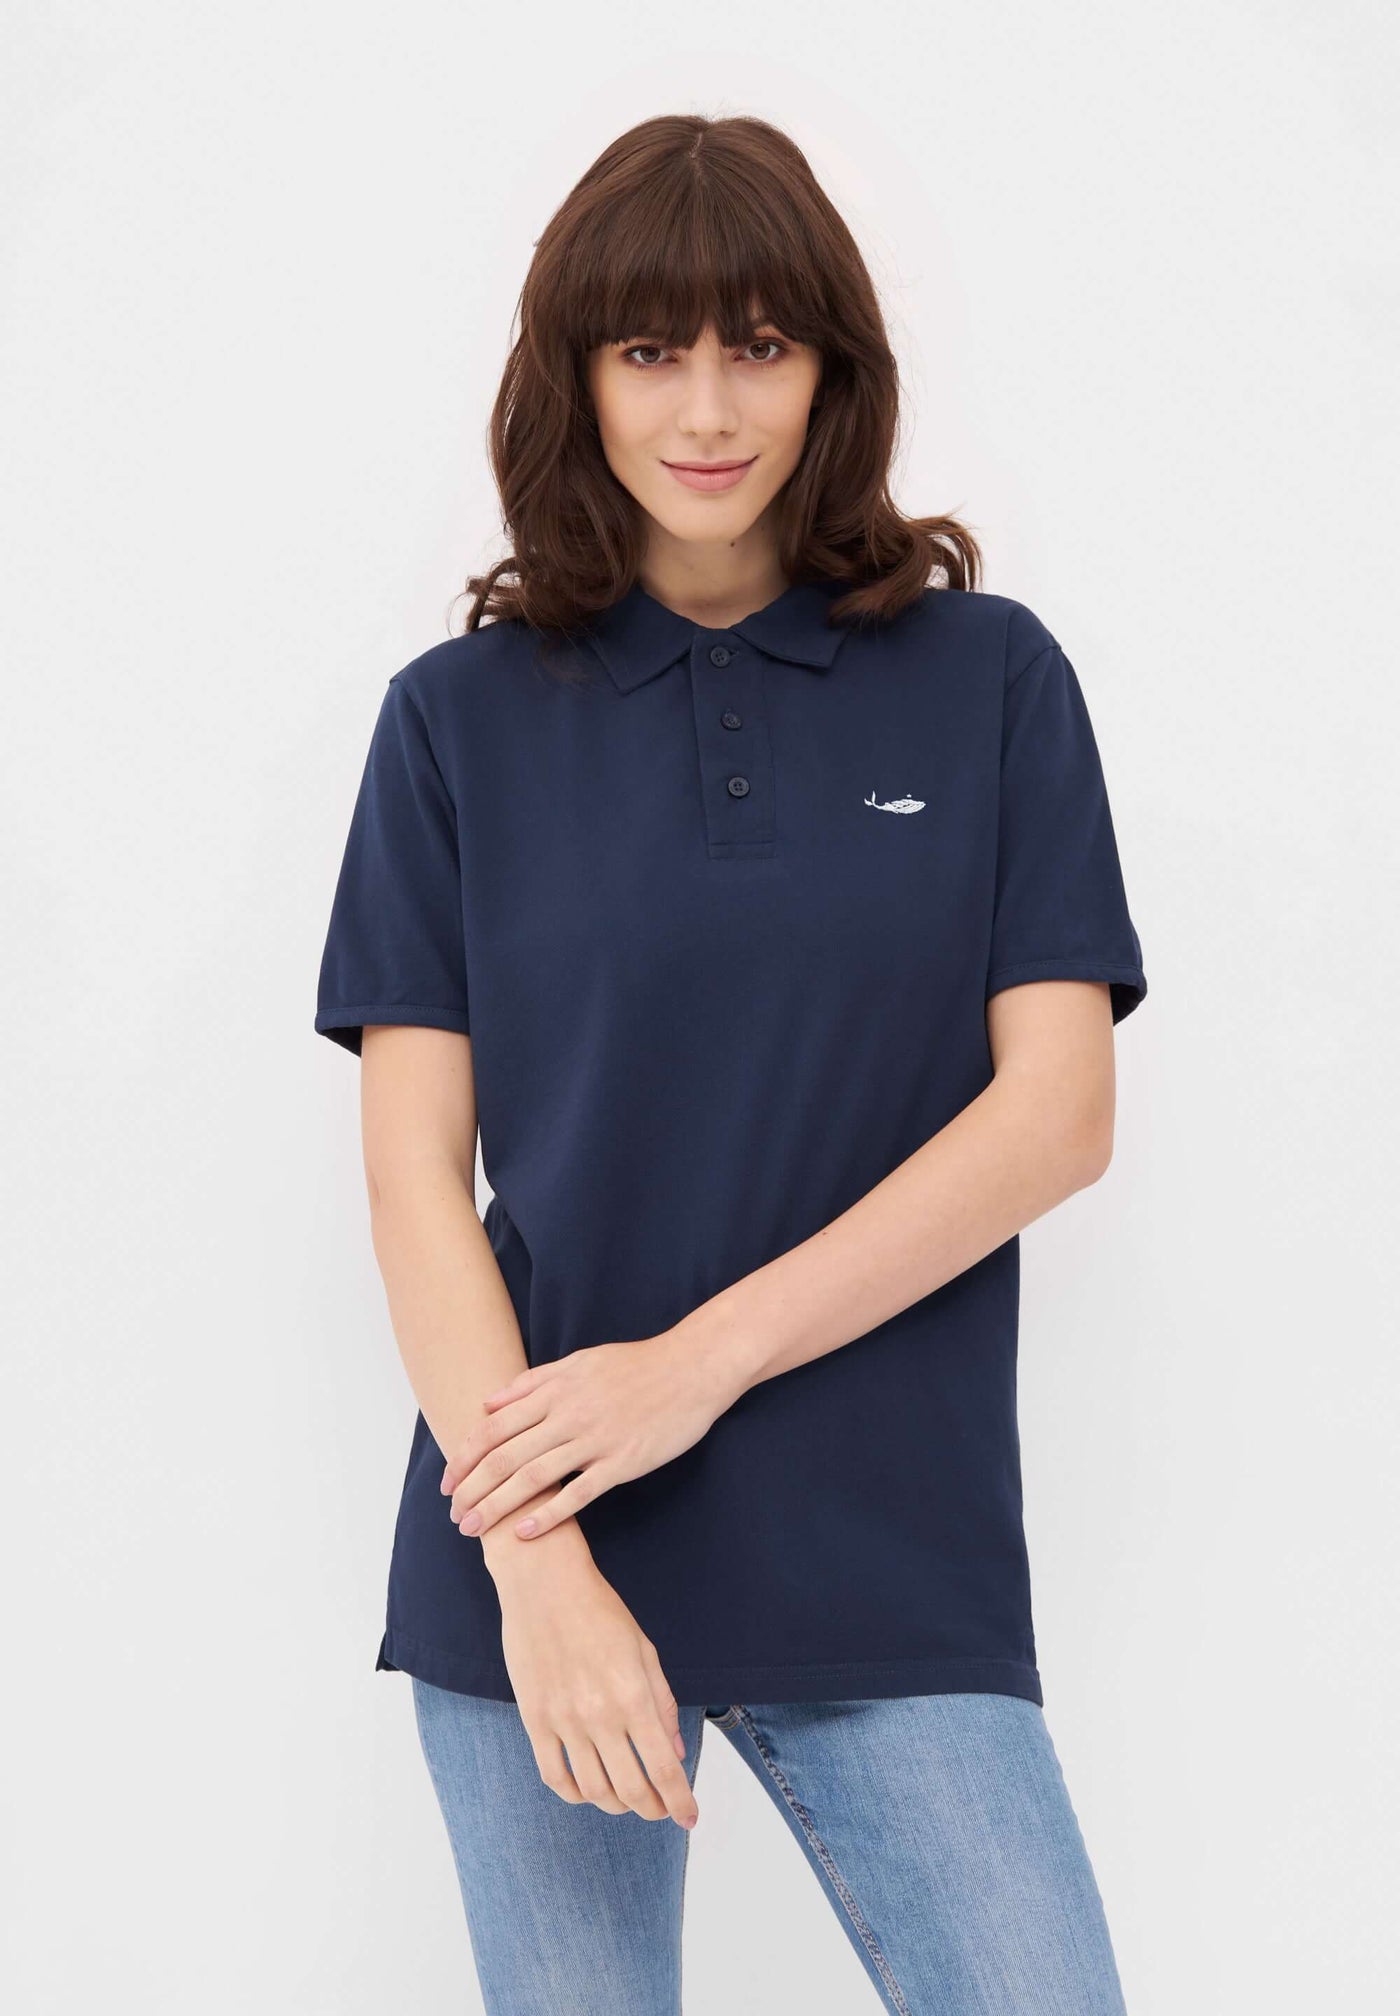 MBRC UNISEX SUSTAINABLE BLUE OCEAN POLO "WHITE LOGO" - FRONTAL VIEW WOMAN